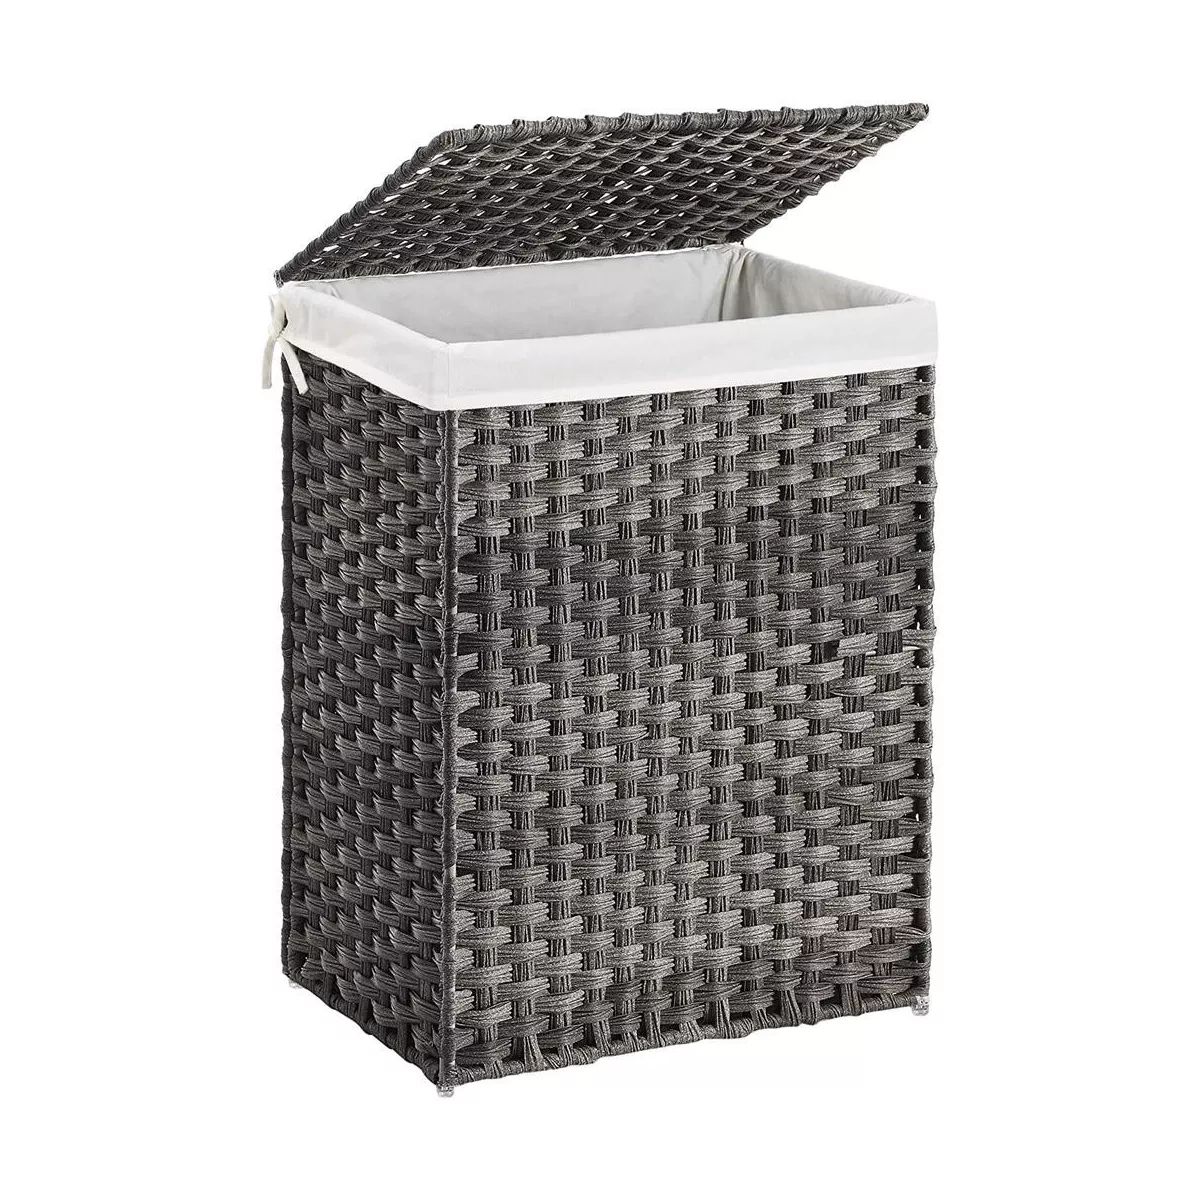 SONGMICS 23.8 Gal (90L) Laundry Hamper Bamboo Laundry Basket with Lid and Handles Wicker hamper | Target